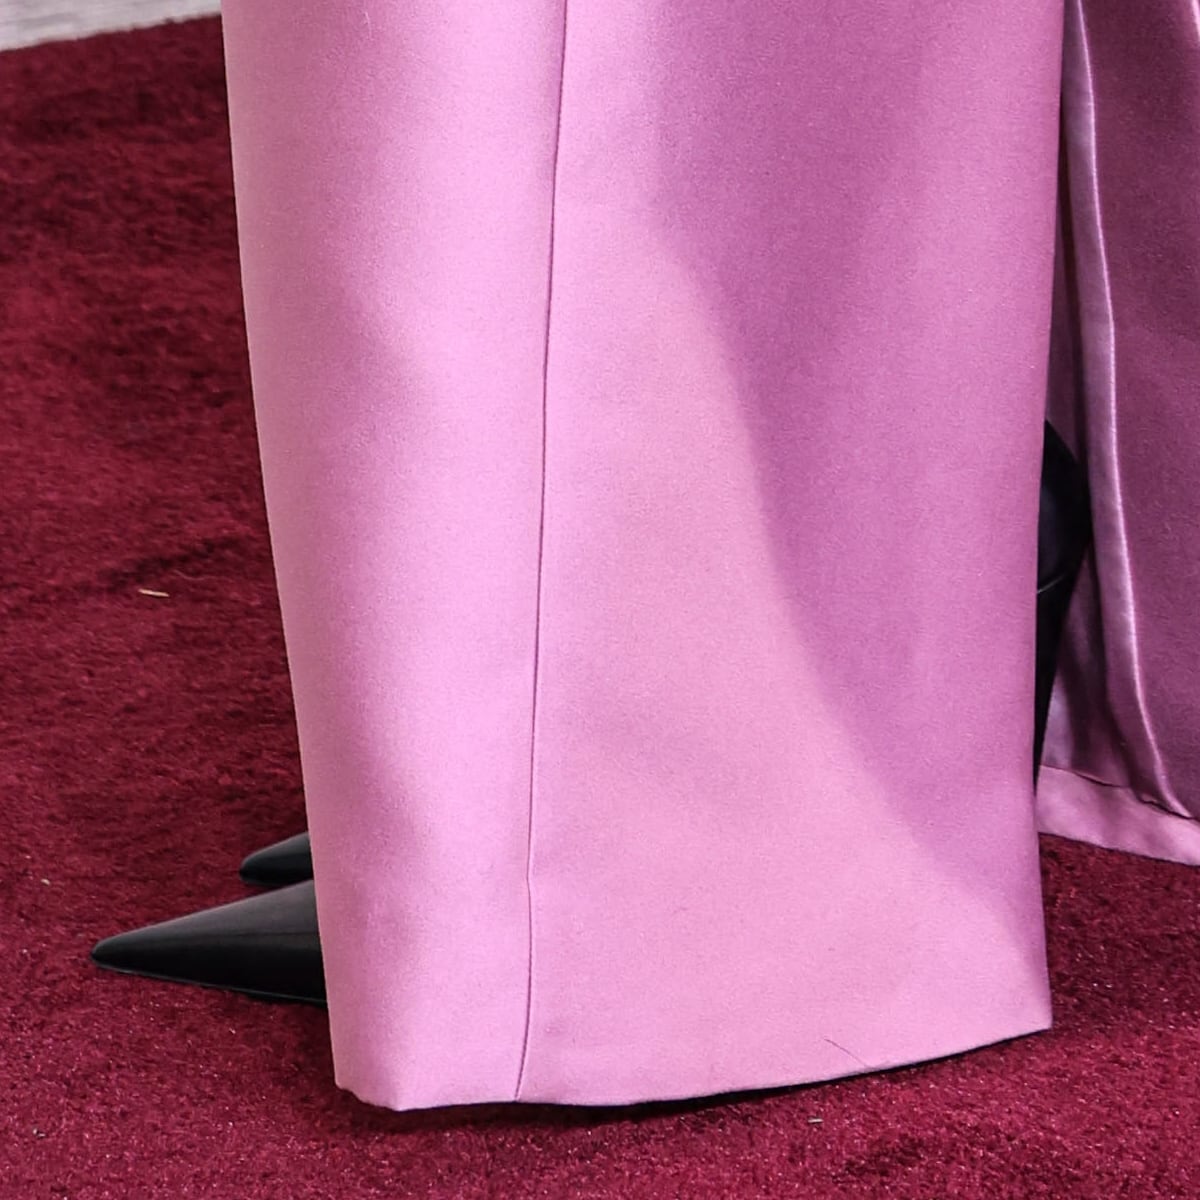 The pointed-toe Prada heels extended Steinfeld's elegant figure, complementing the gown’s sleek design